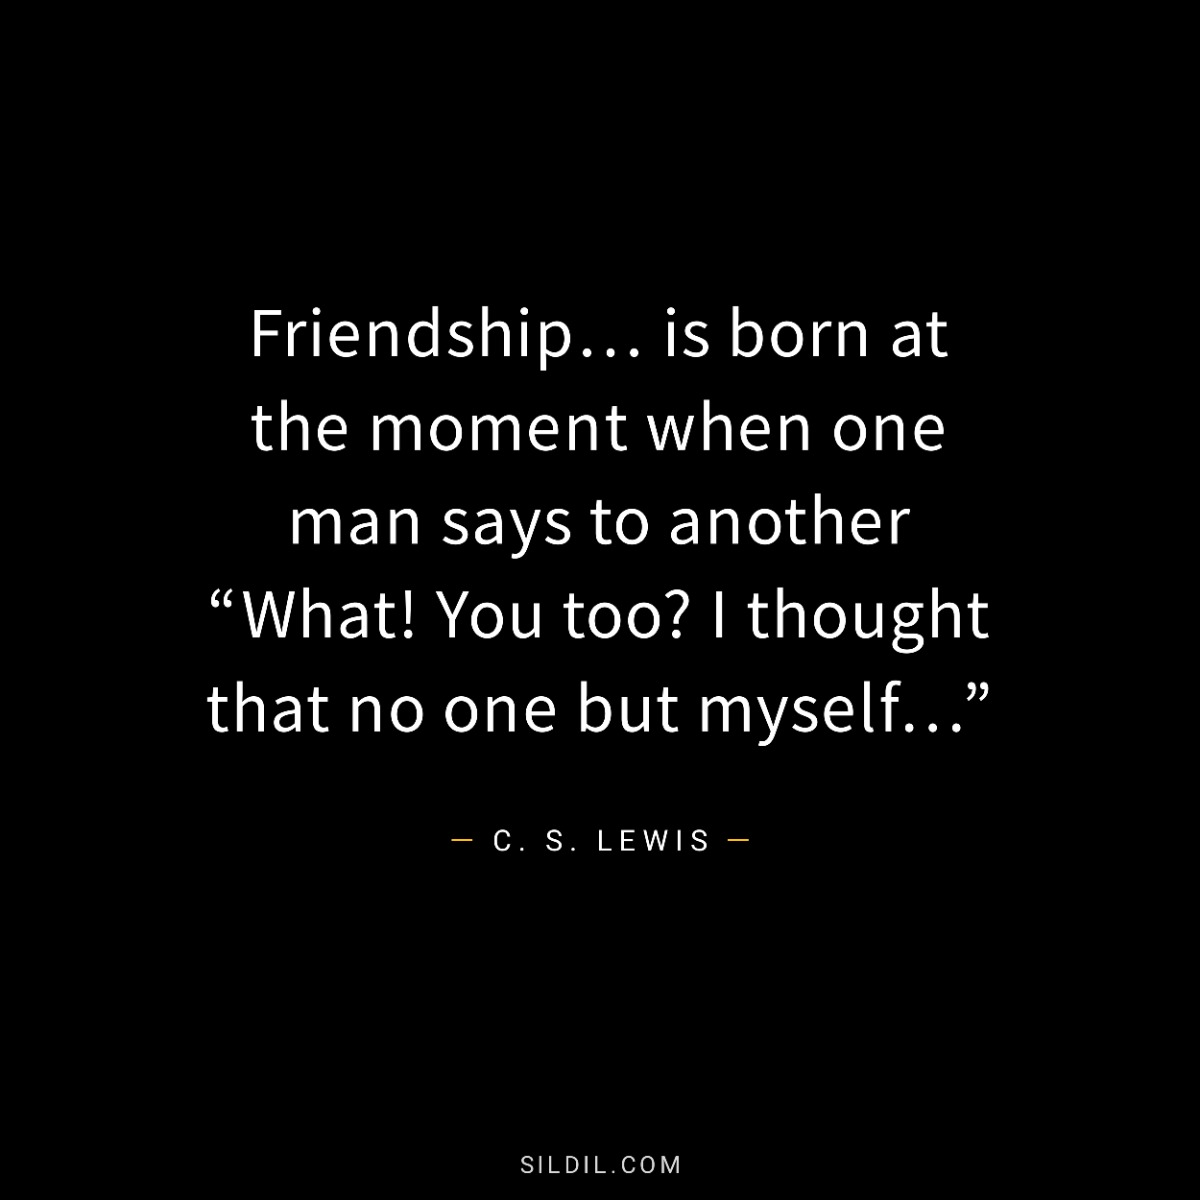 Friendship… is born at the moment when one man says to another “What! You too? I thought that no one but myself…”